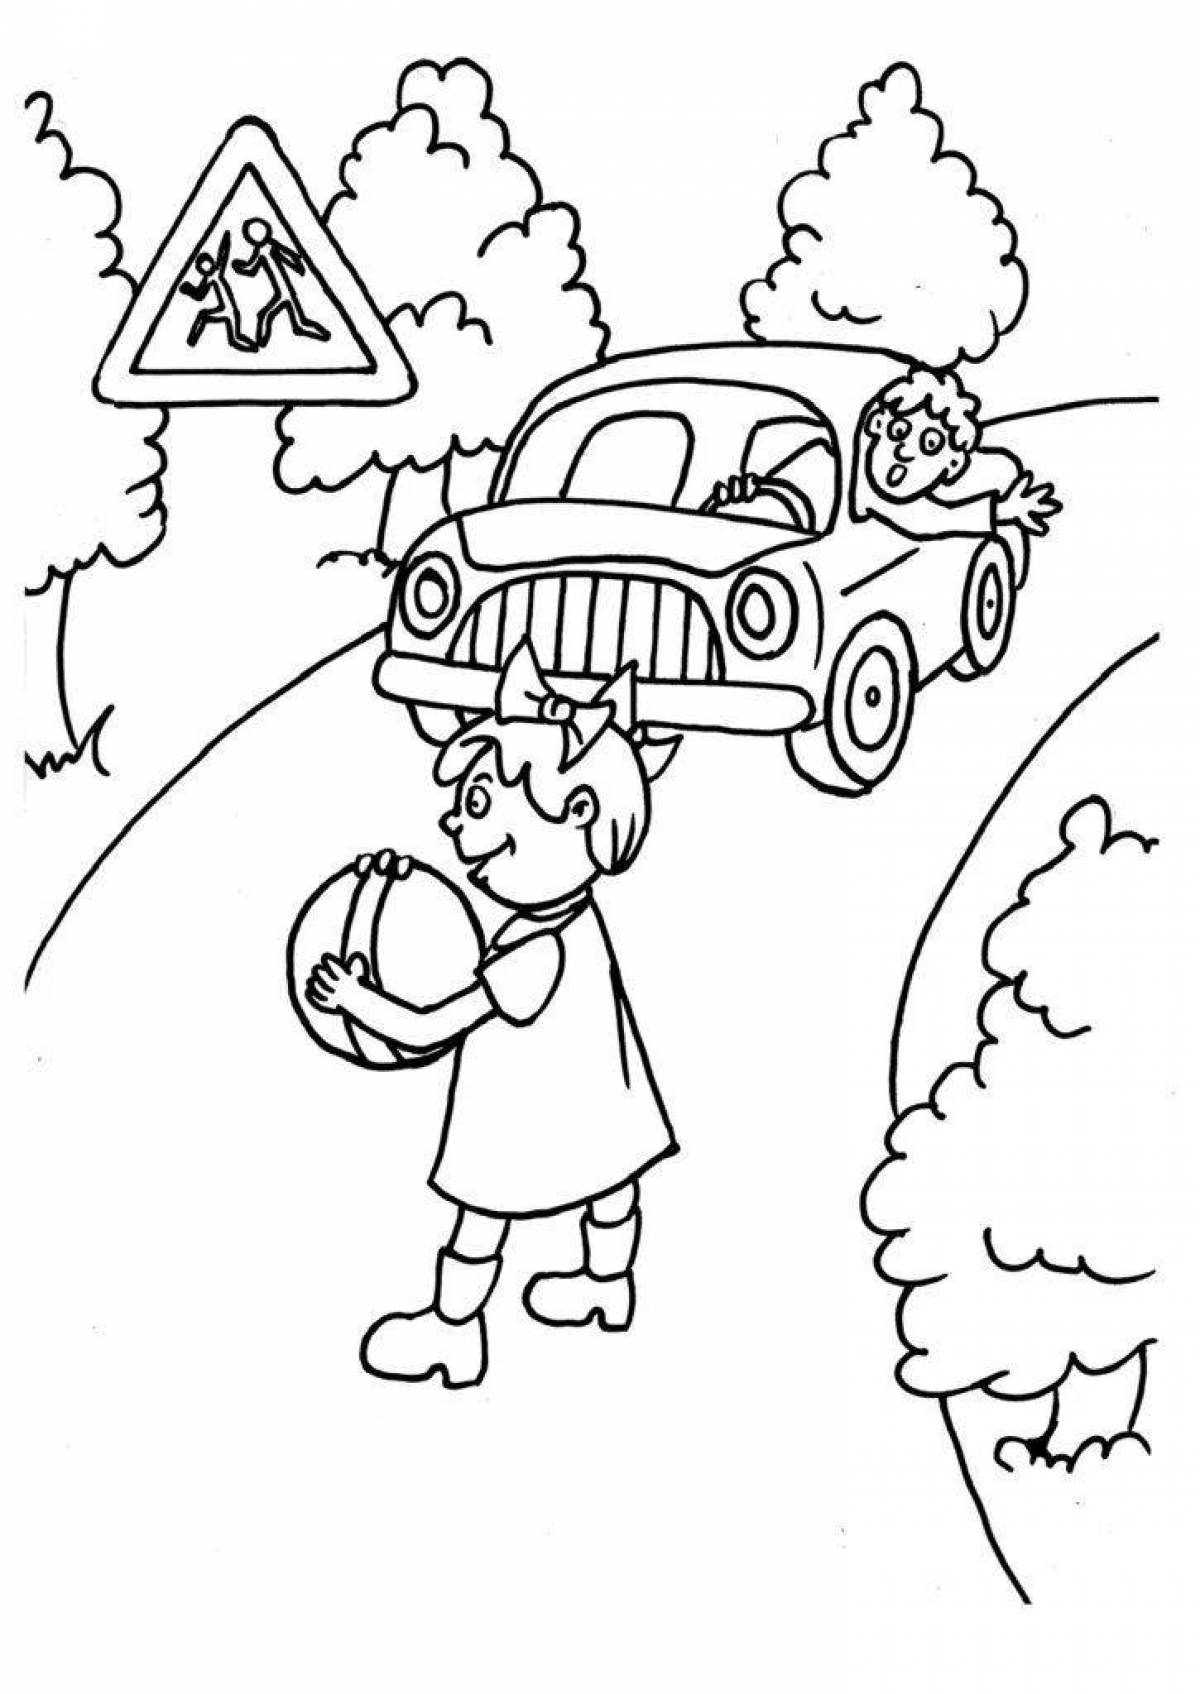 Funny rules of the road coloring for children 6-7 years old